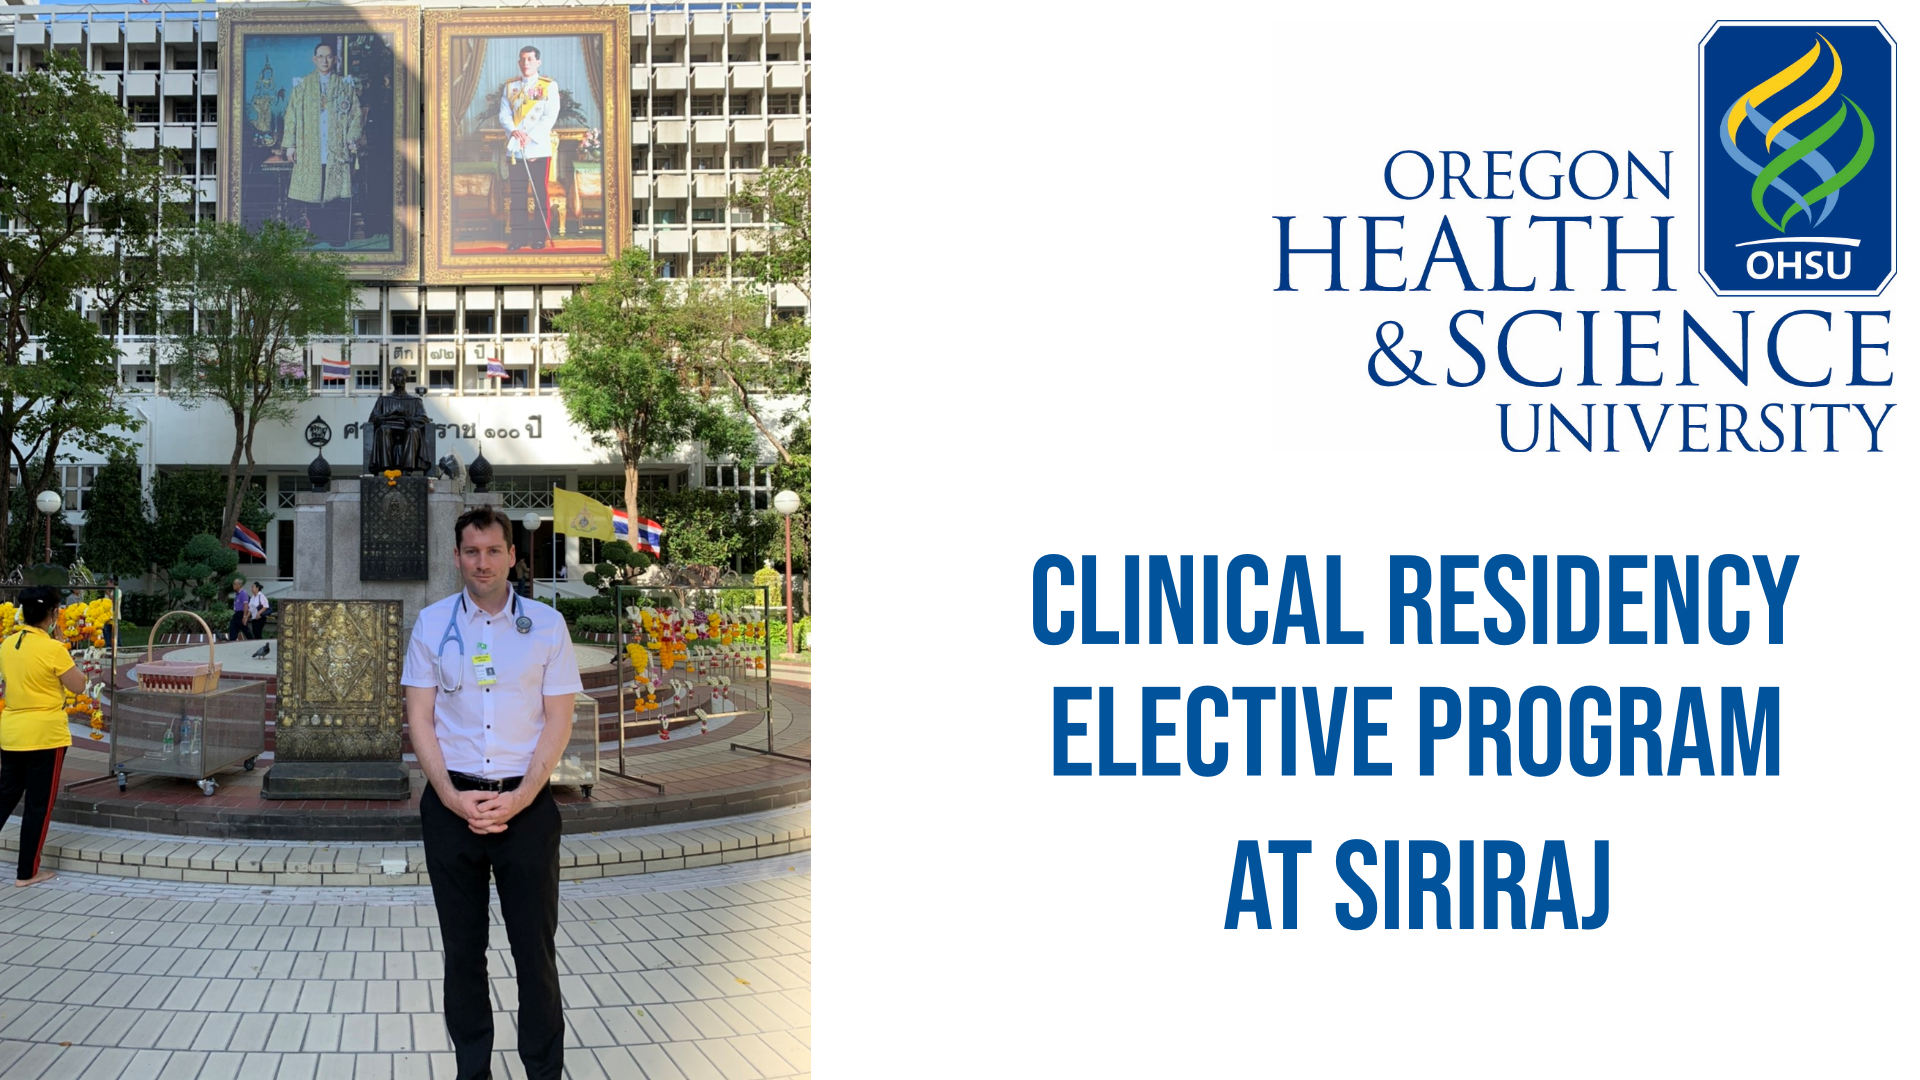 The Resident from OHSU Undertake a Clinical Residency Elective at Siriraj